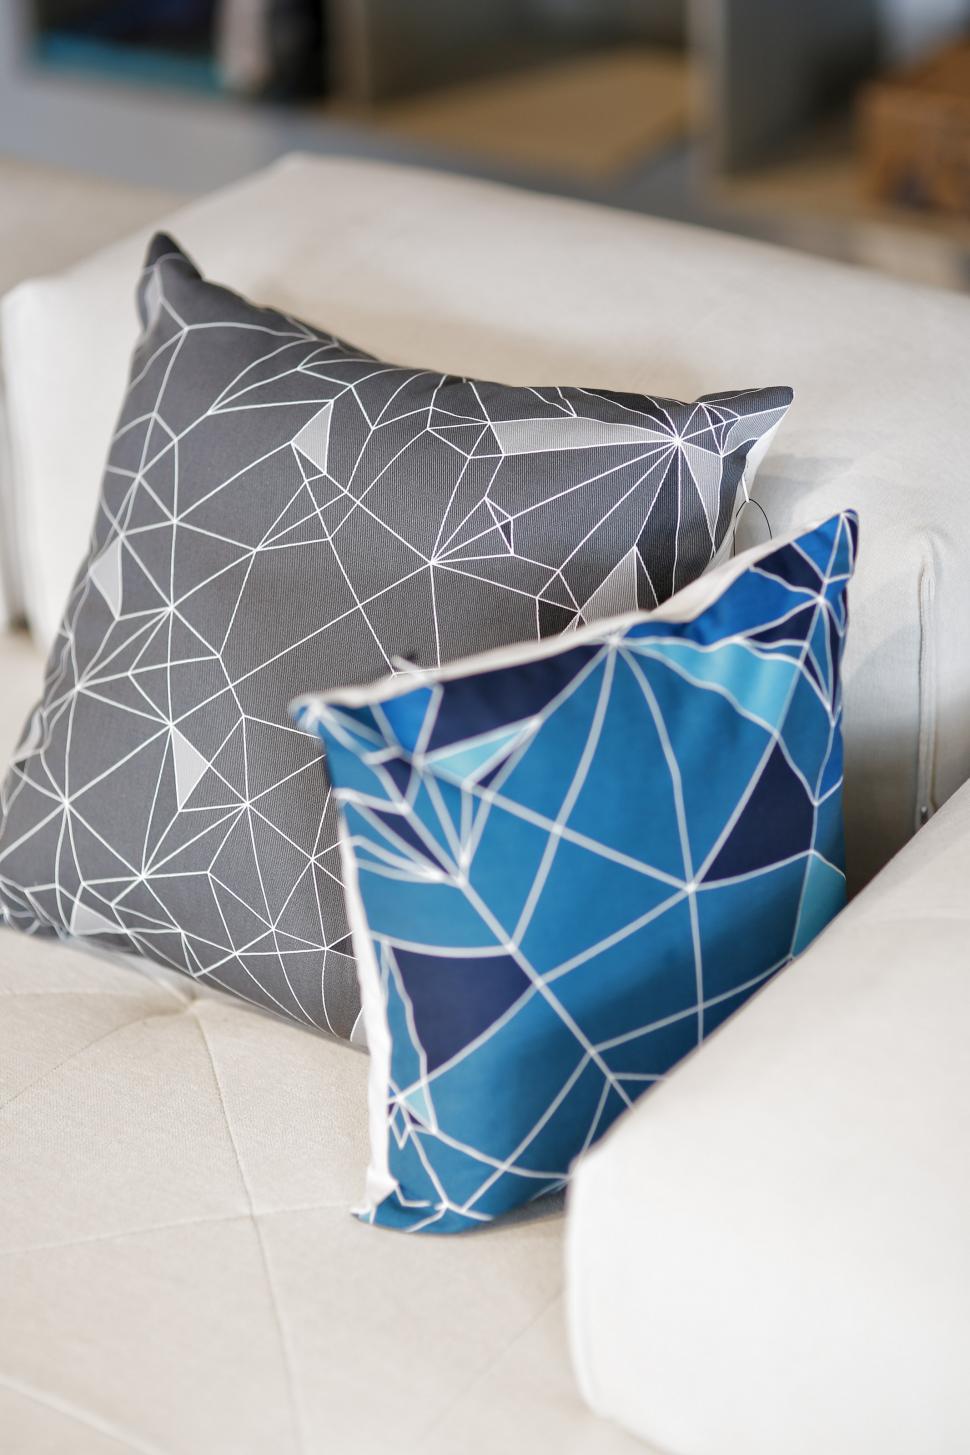 Free Image of Close Up of Two Pillows on a Couch 